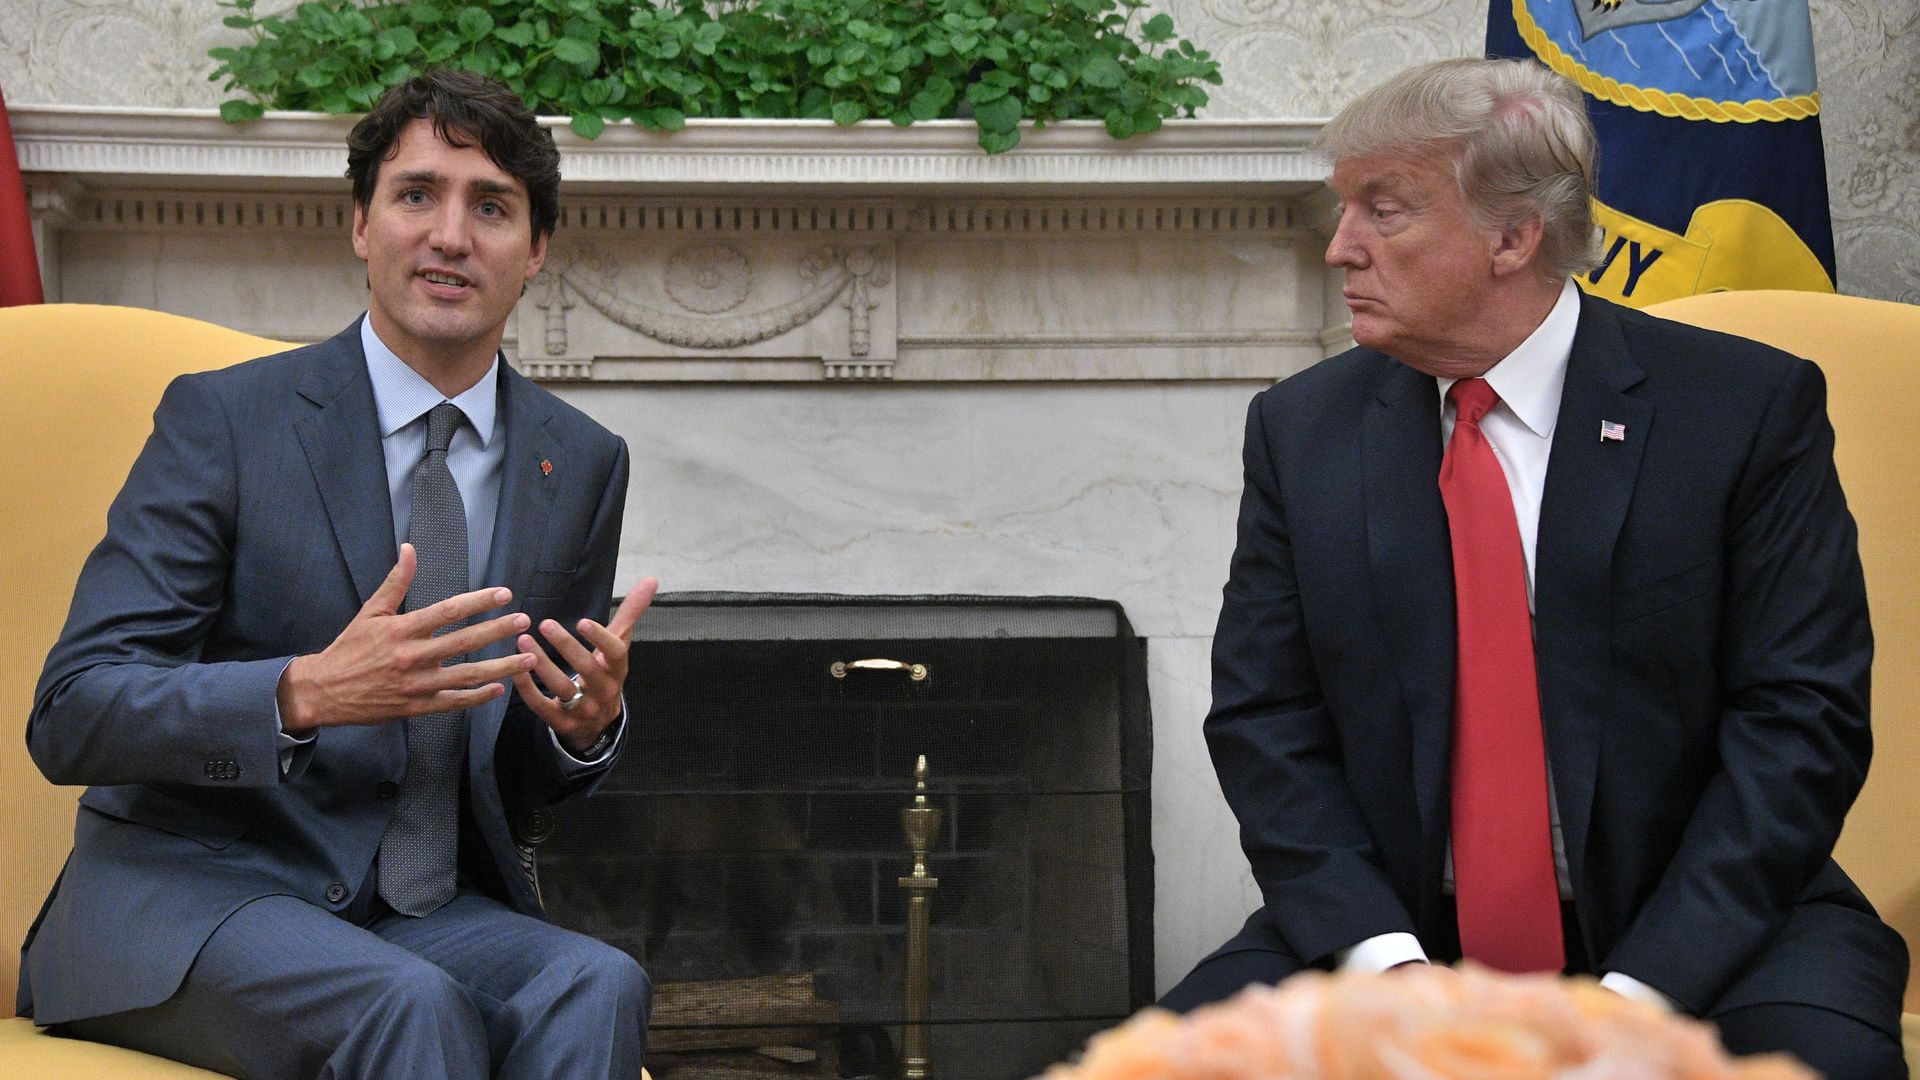 President Trump and Canadian Prime Minister Justin Trudeau